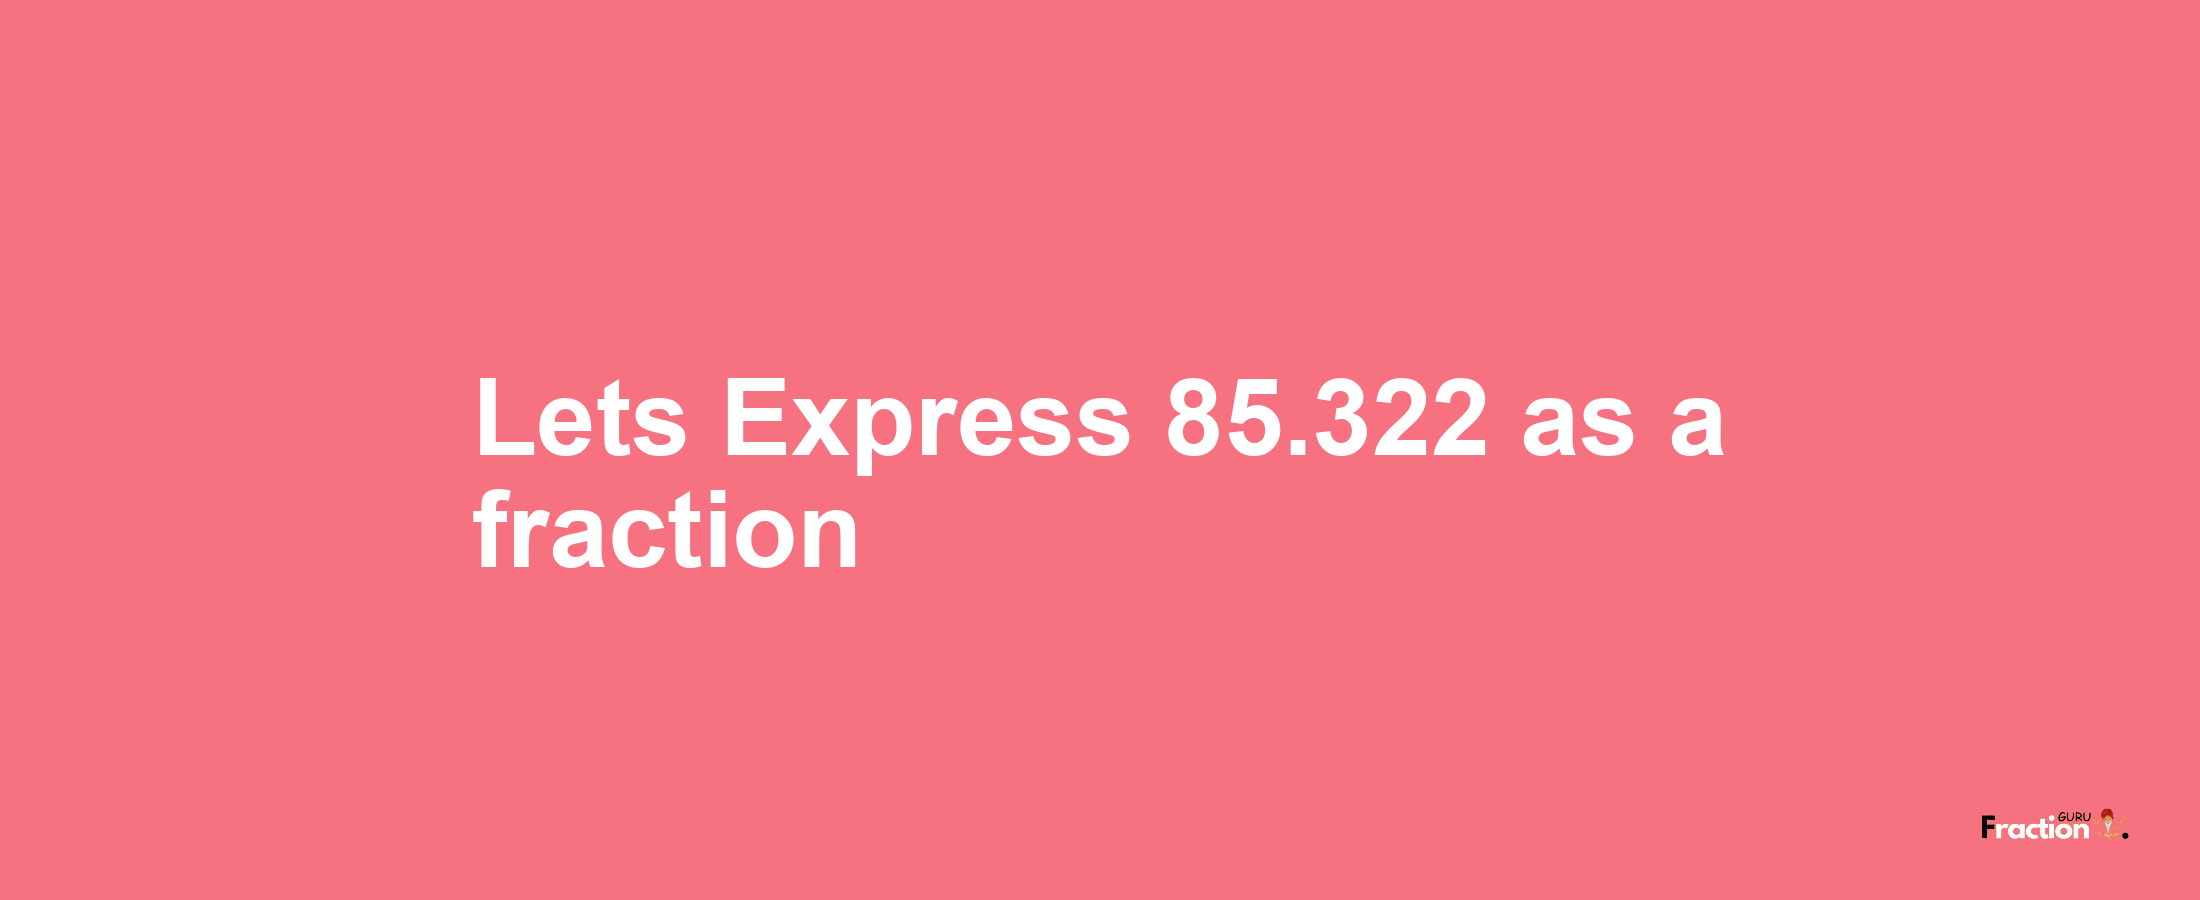 Lets Express 85.322 as afraction